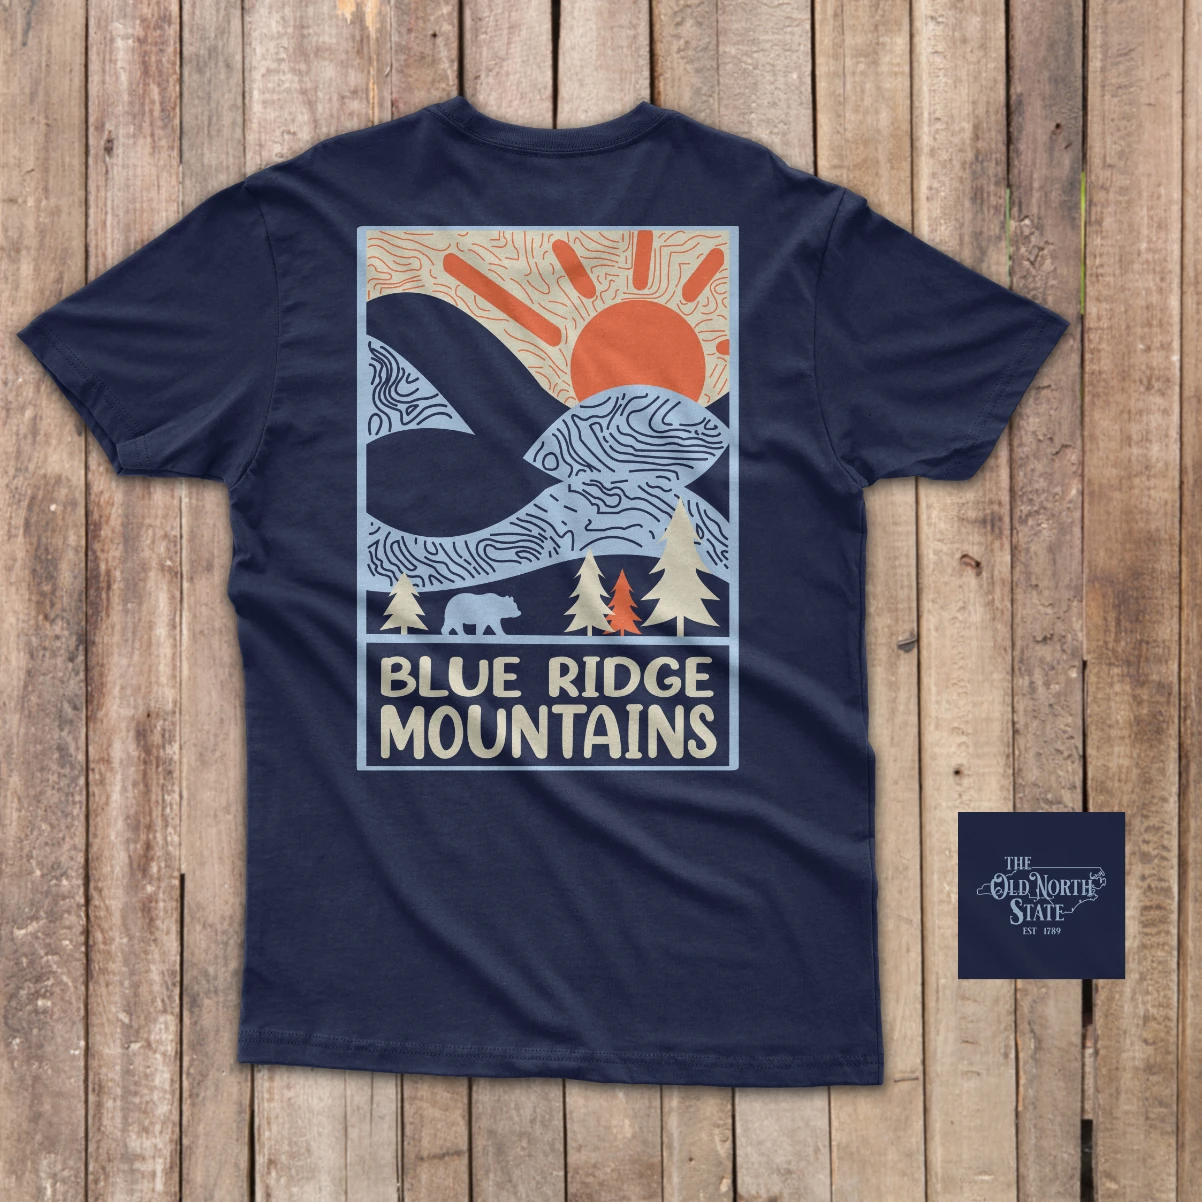 The Old North State - Blue Ridge Mountains